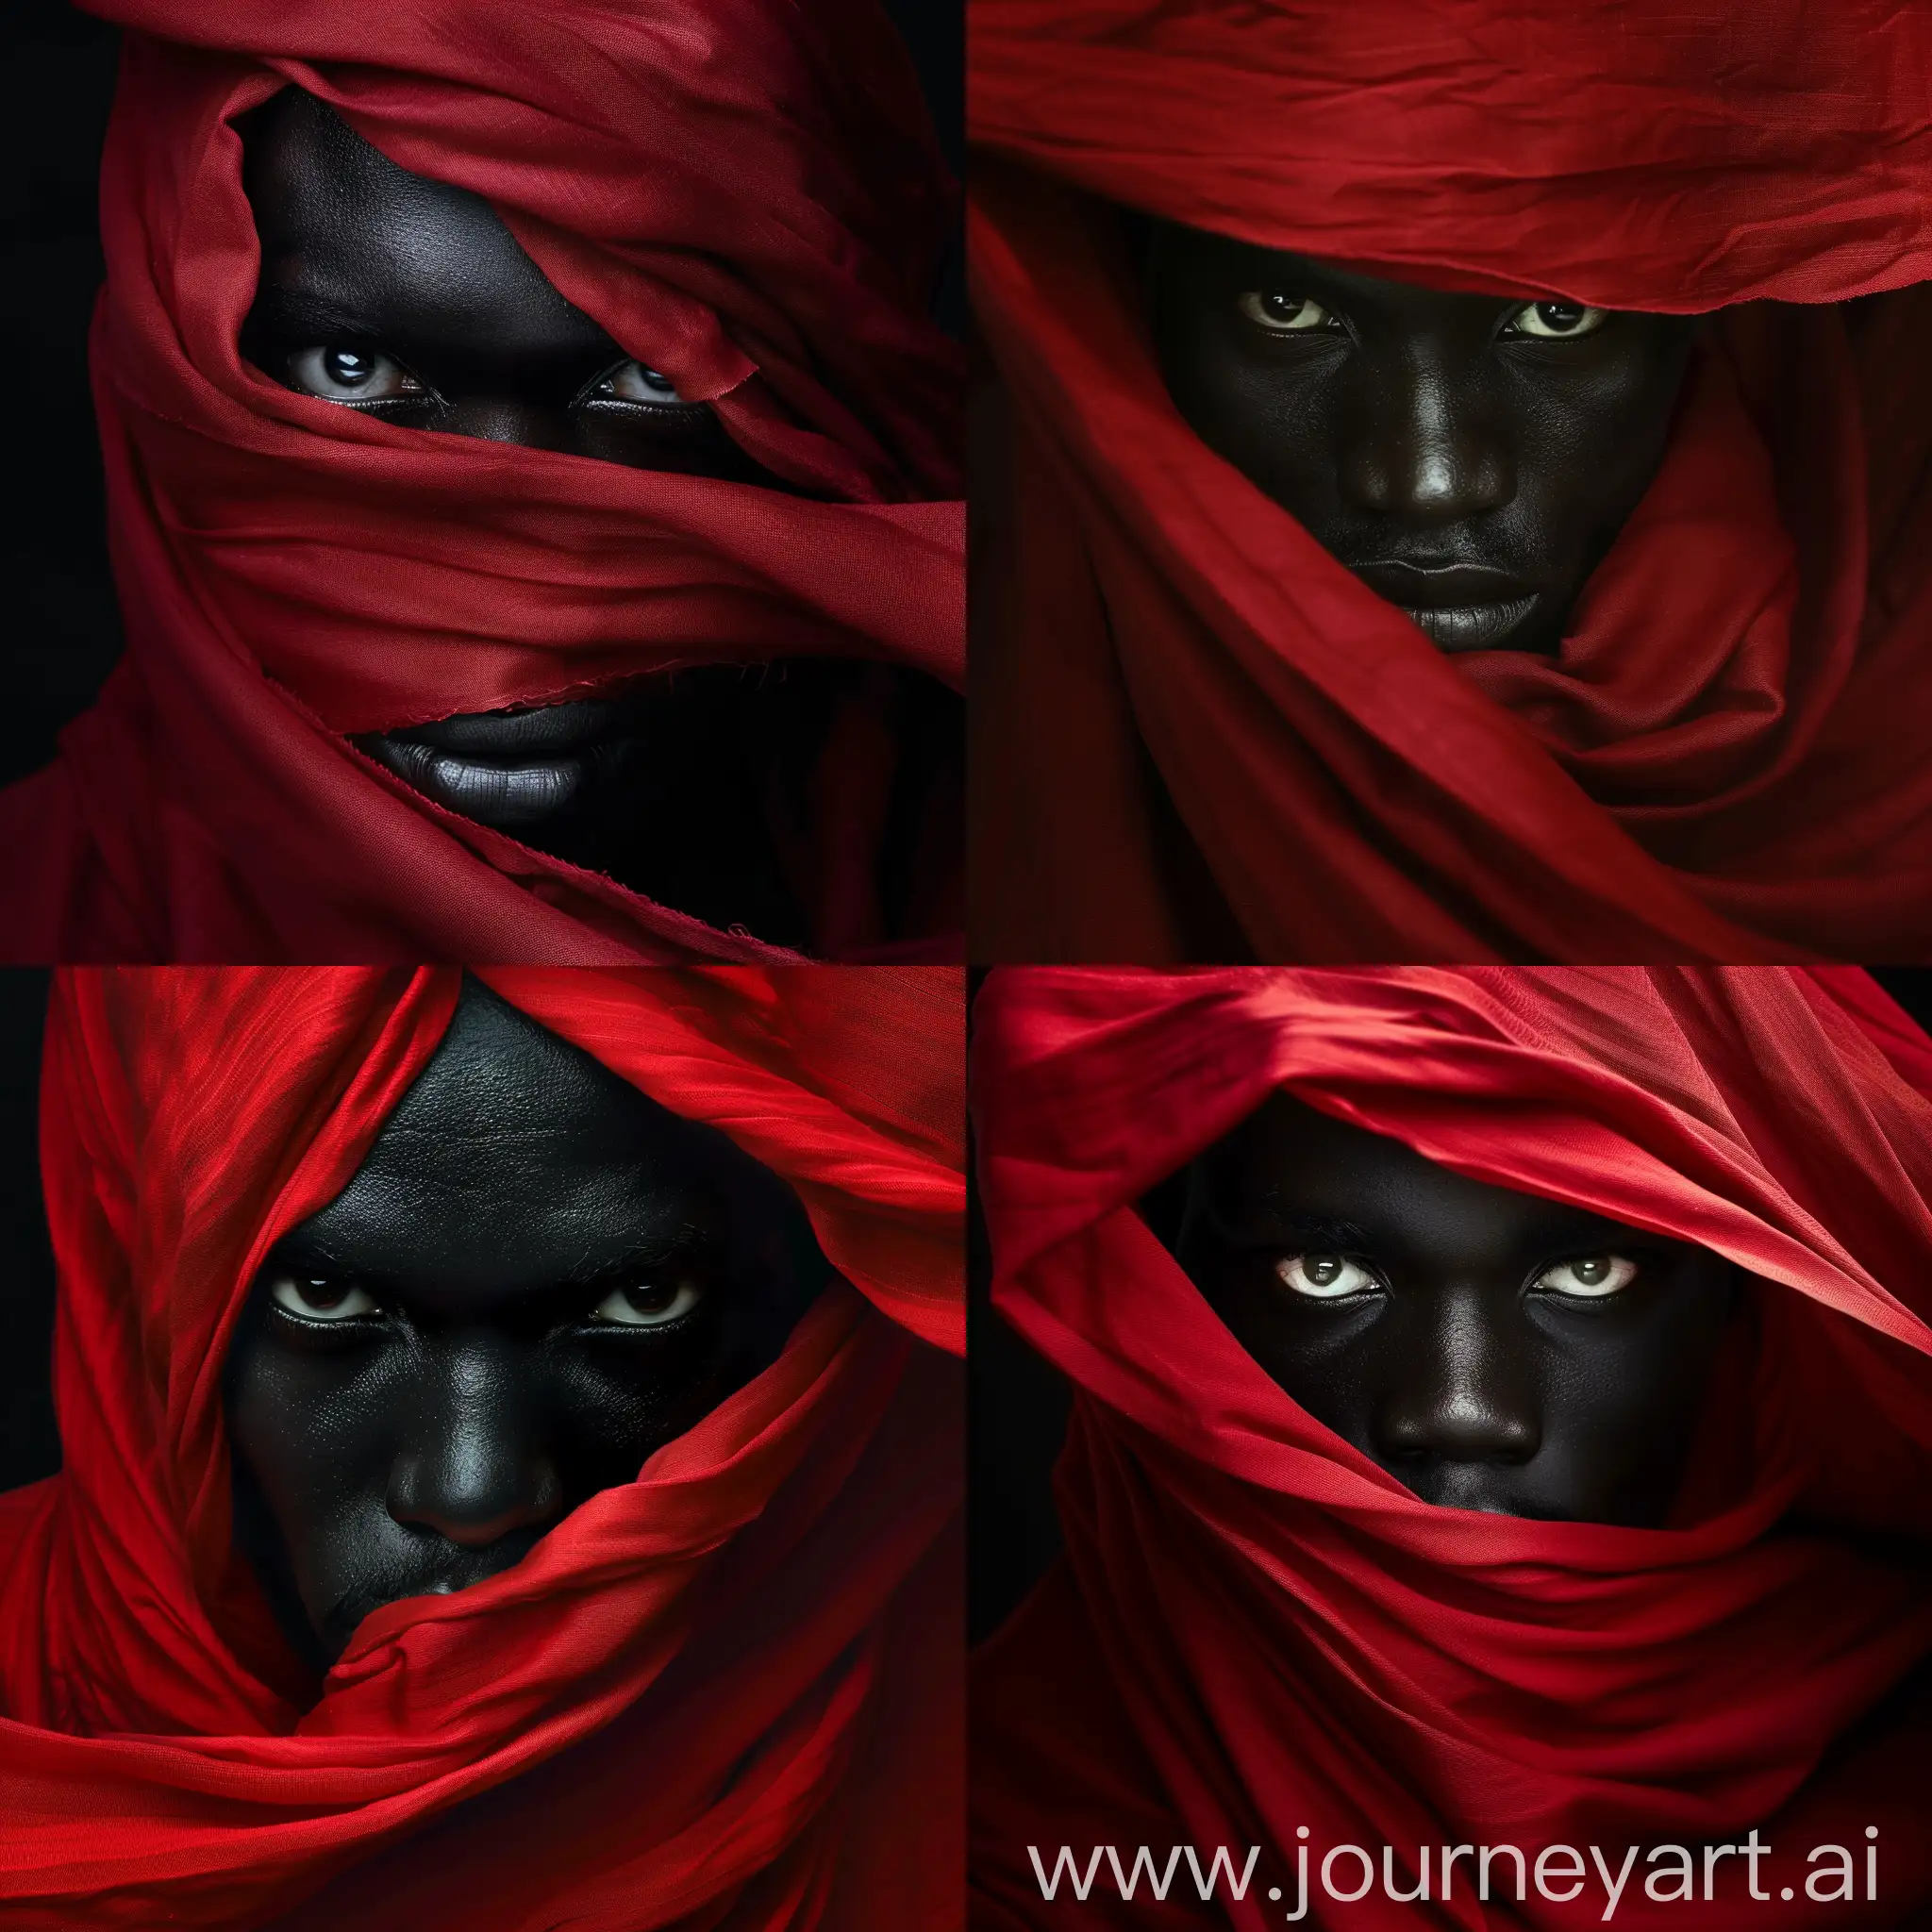 Handsome black man's face, which is covered by a red cloth flowing in front of his face, only his sharp eyes and forehead are visible, he is black skinned, the shot is tight